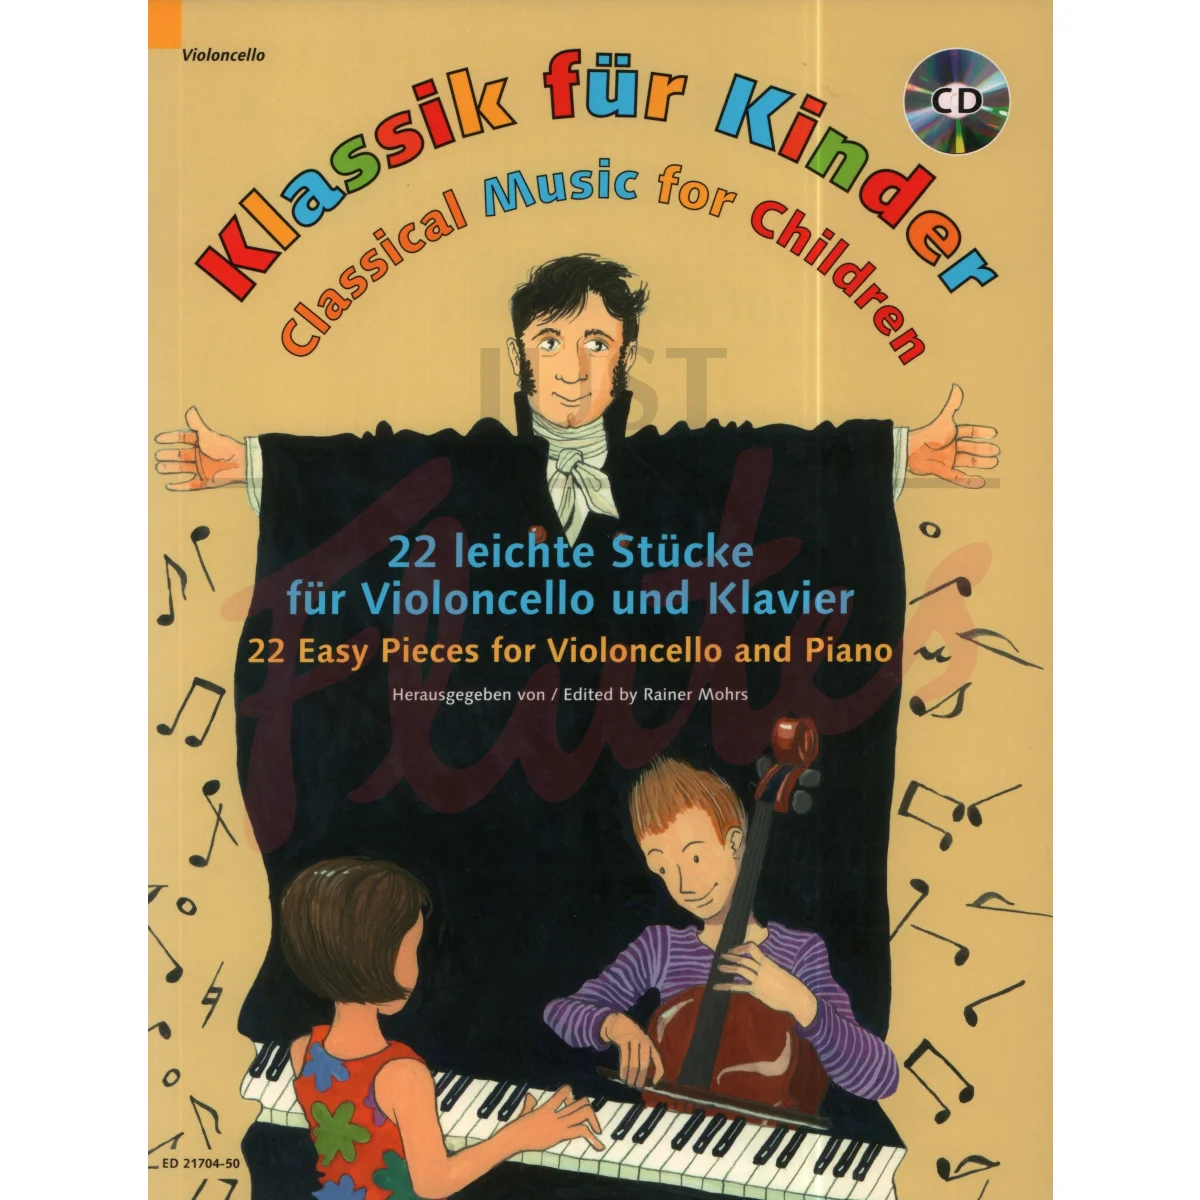 Classical Music for Children for Cello and Piano